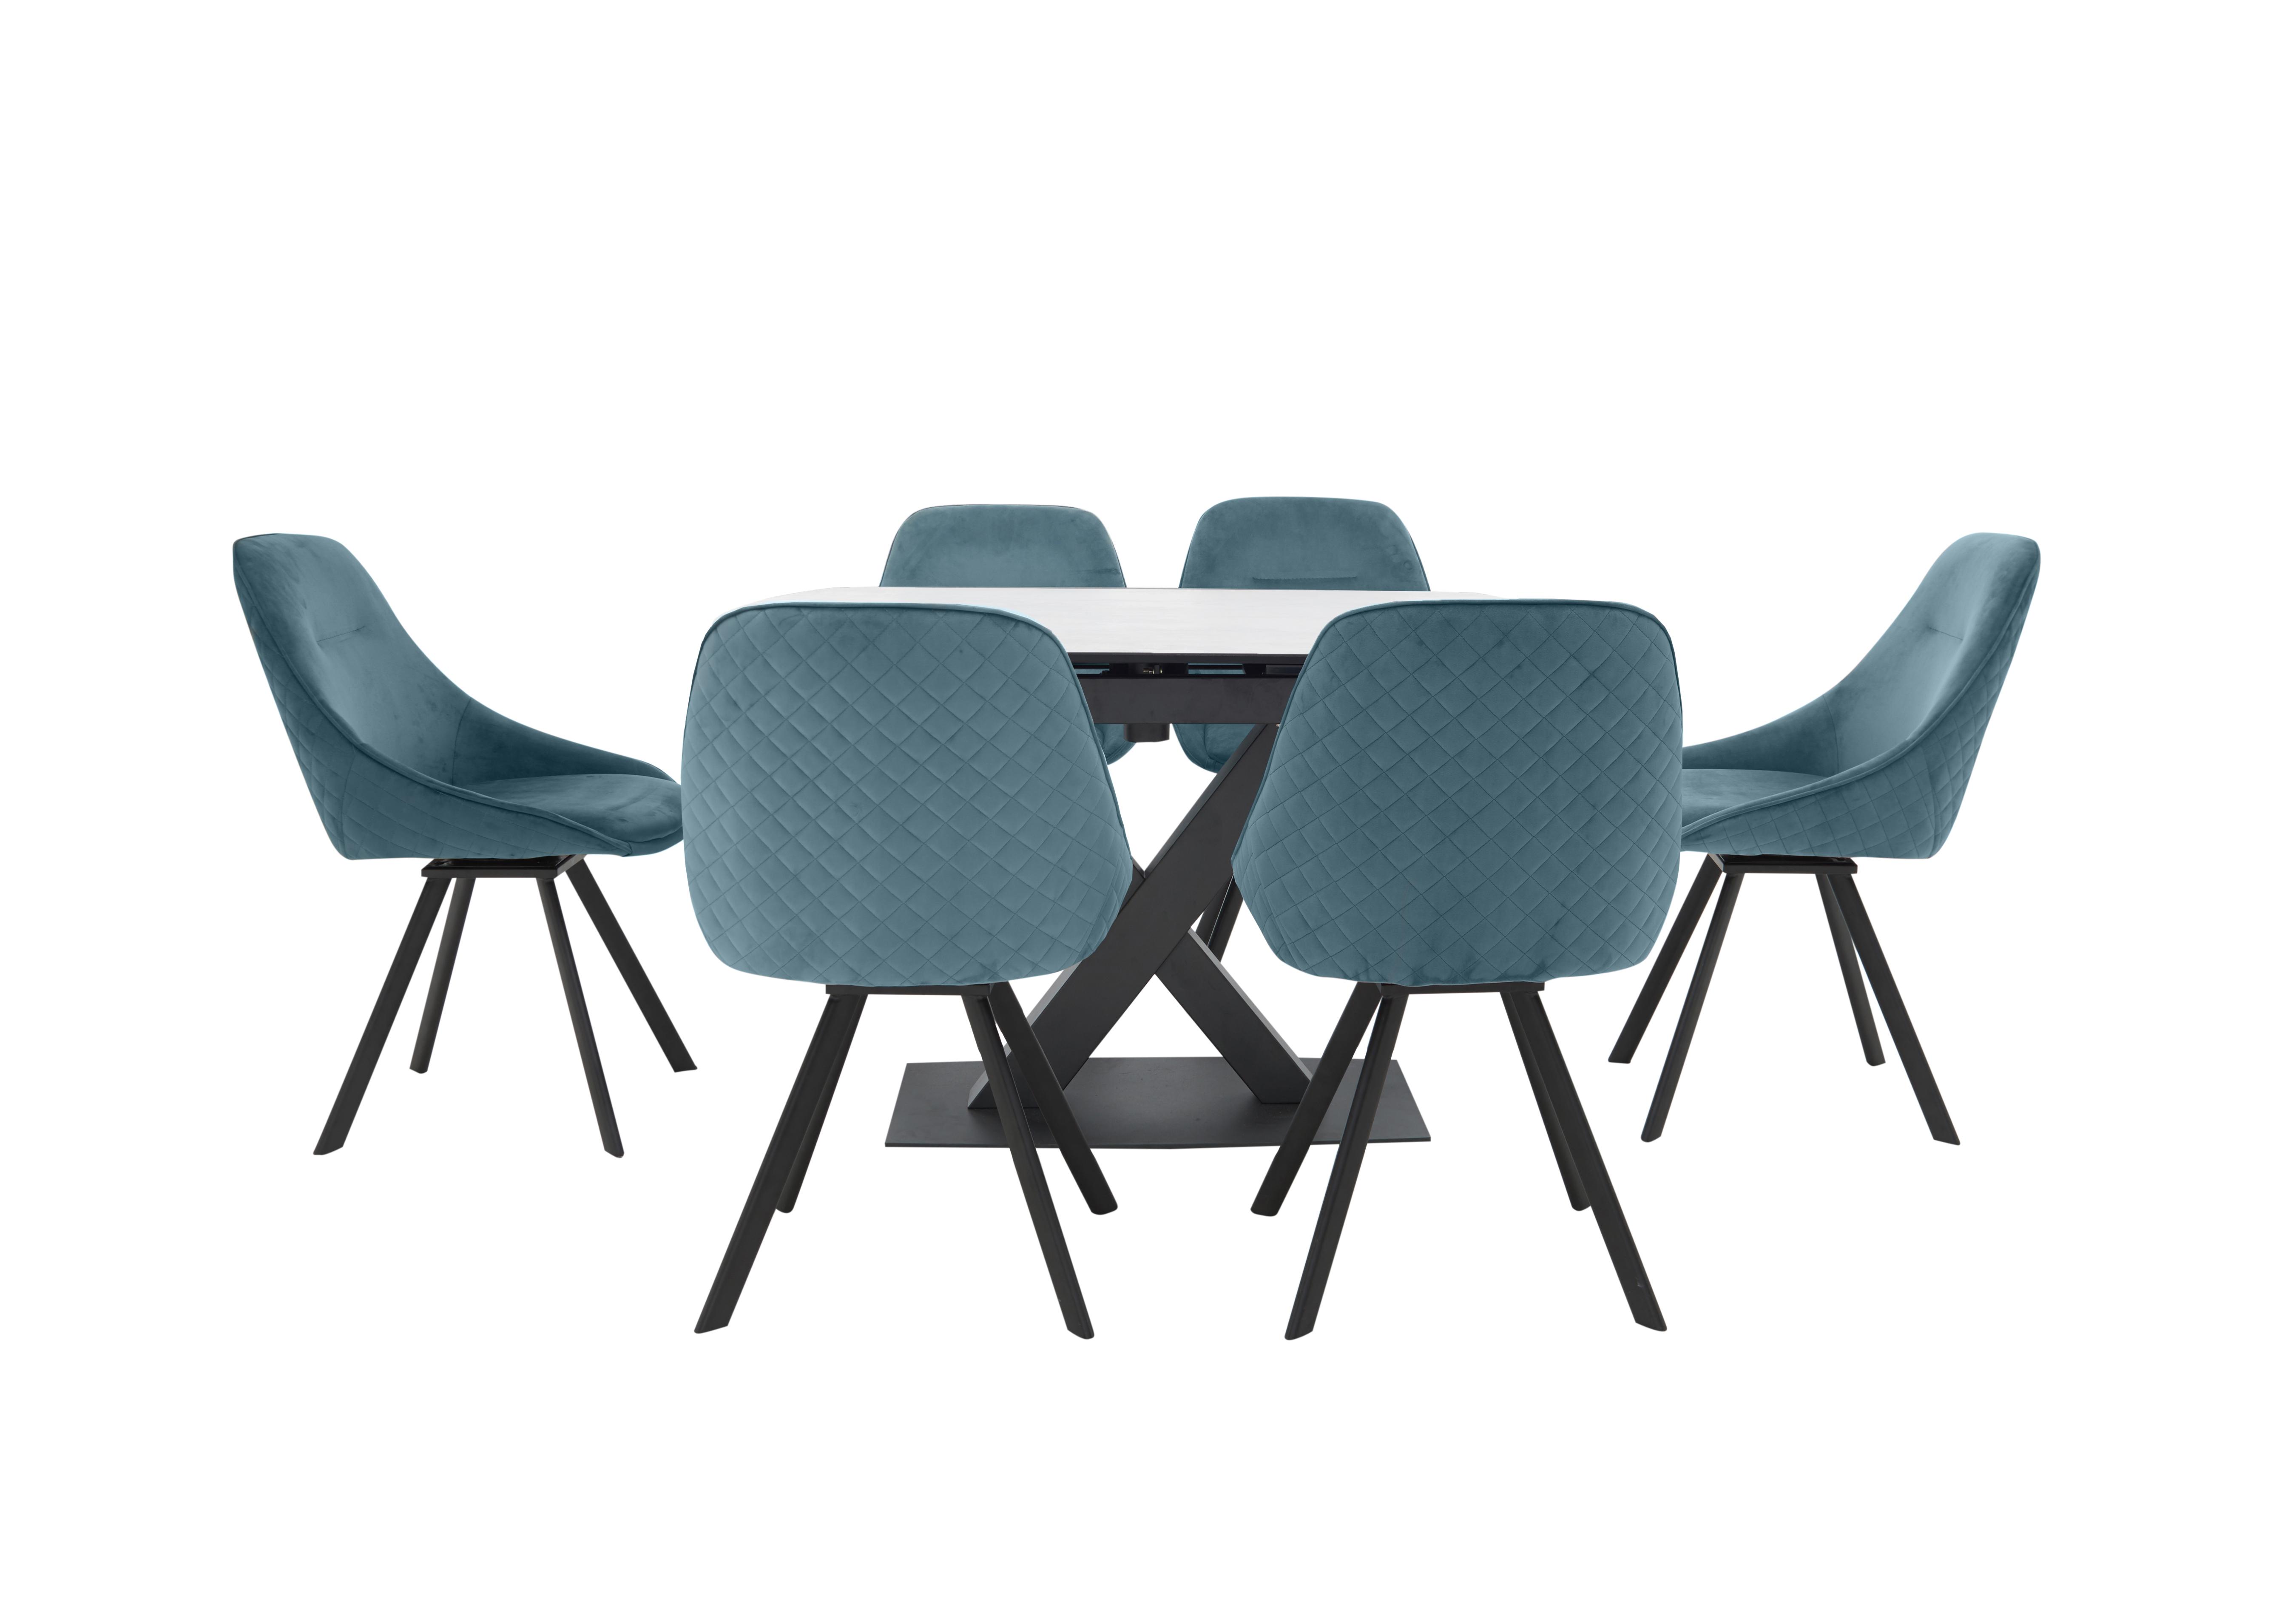 Arctic Extending Dining Table with White Top and 6 Swivel Chairs in Blue Velvet Chairs on Furniture Village